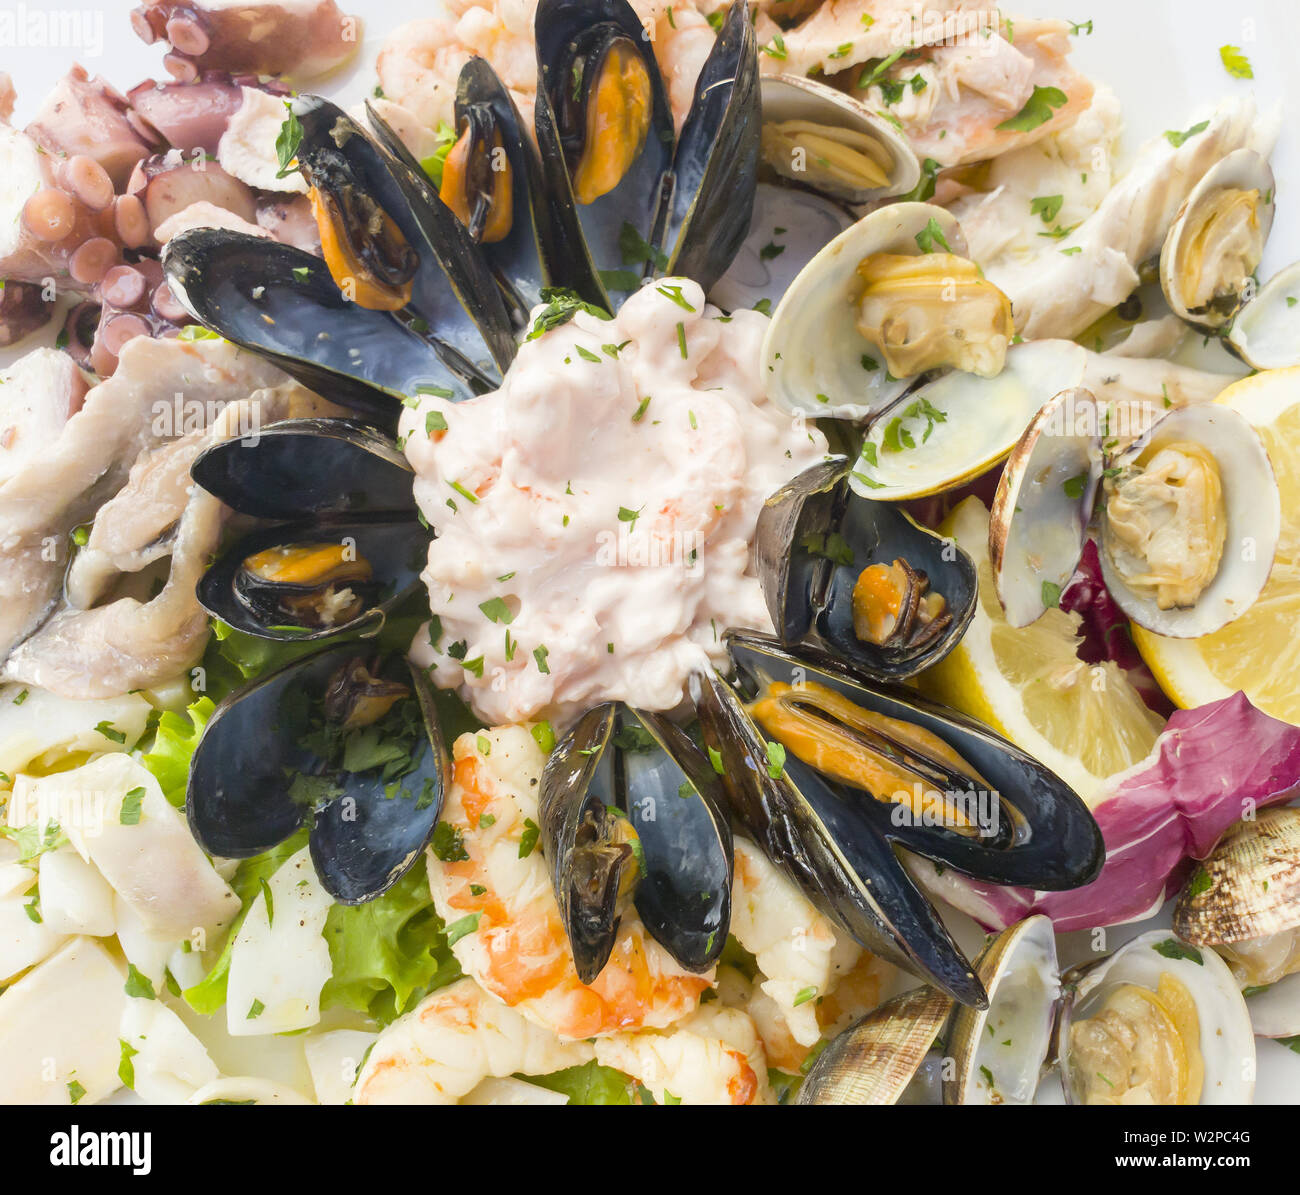 Seafood shells mussels as a cold appetizer Stock Photo